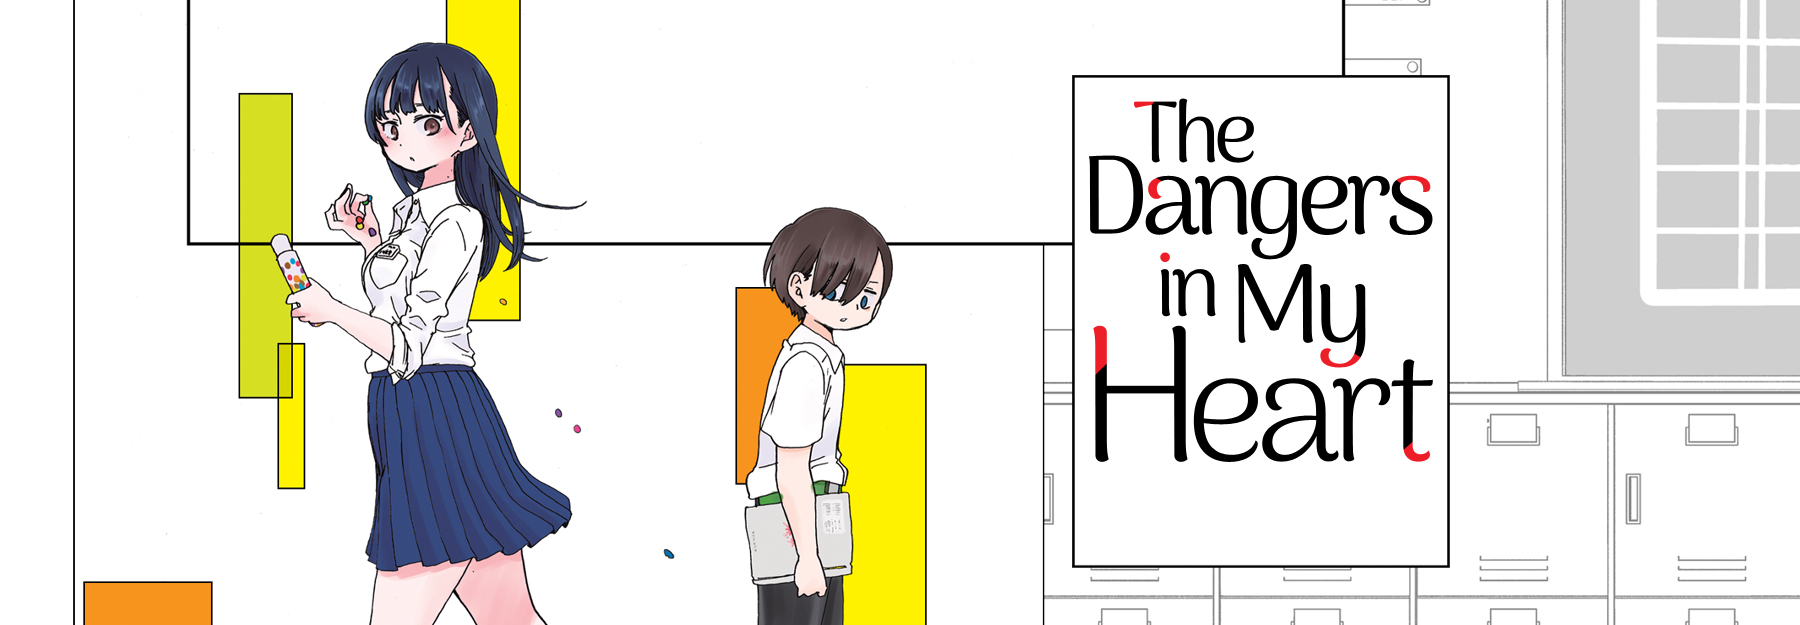 A banner image promoting the Seven Seas Entertainment English language release of the manga The Dangers in My Heart by Norio Sakurai.